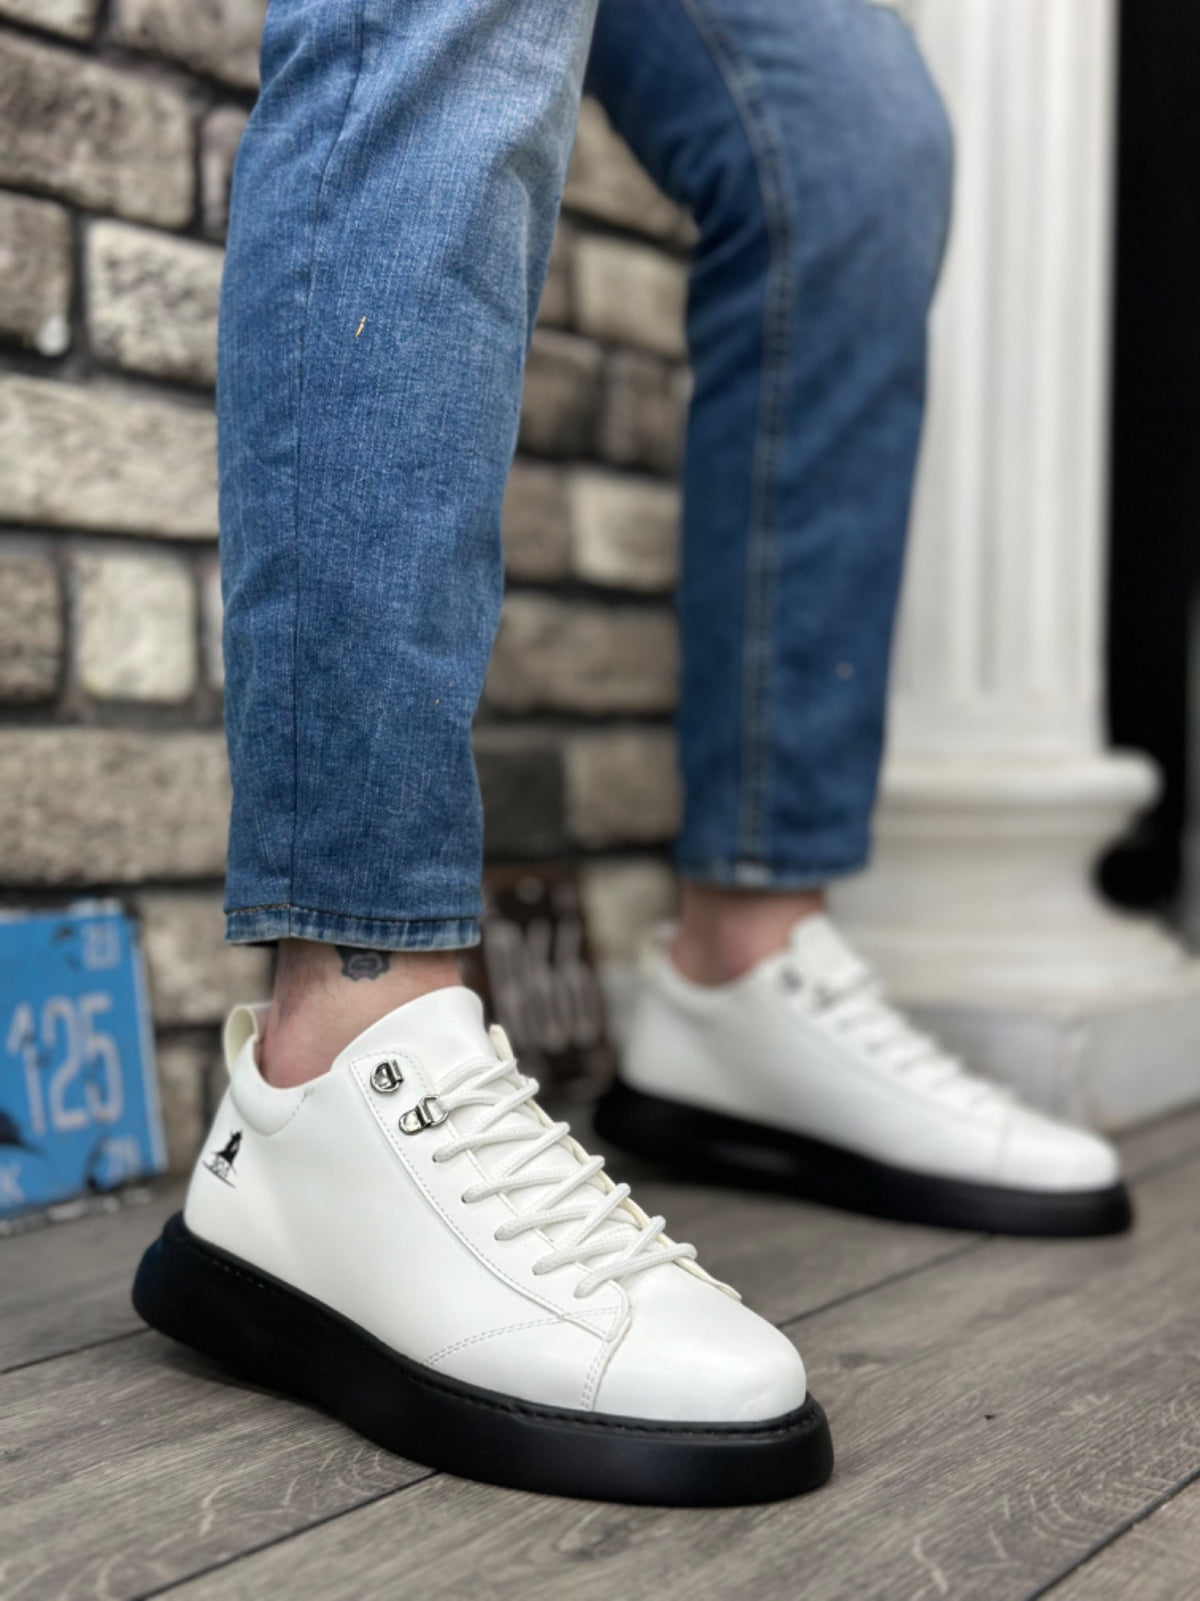 BA0331 Lace-Up Men's High Sole White Black Skin Sports Shoes - STREETMODE ™